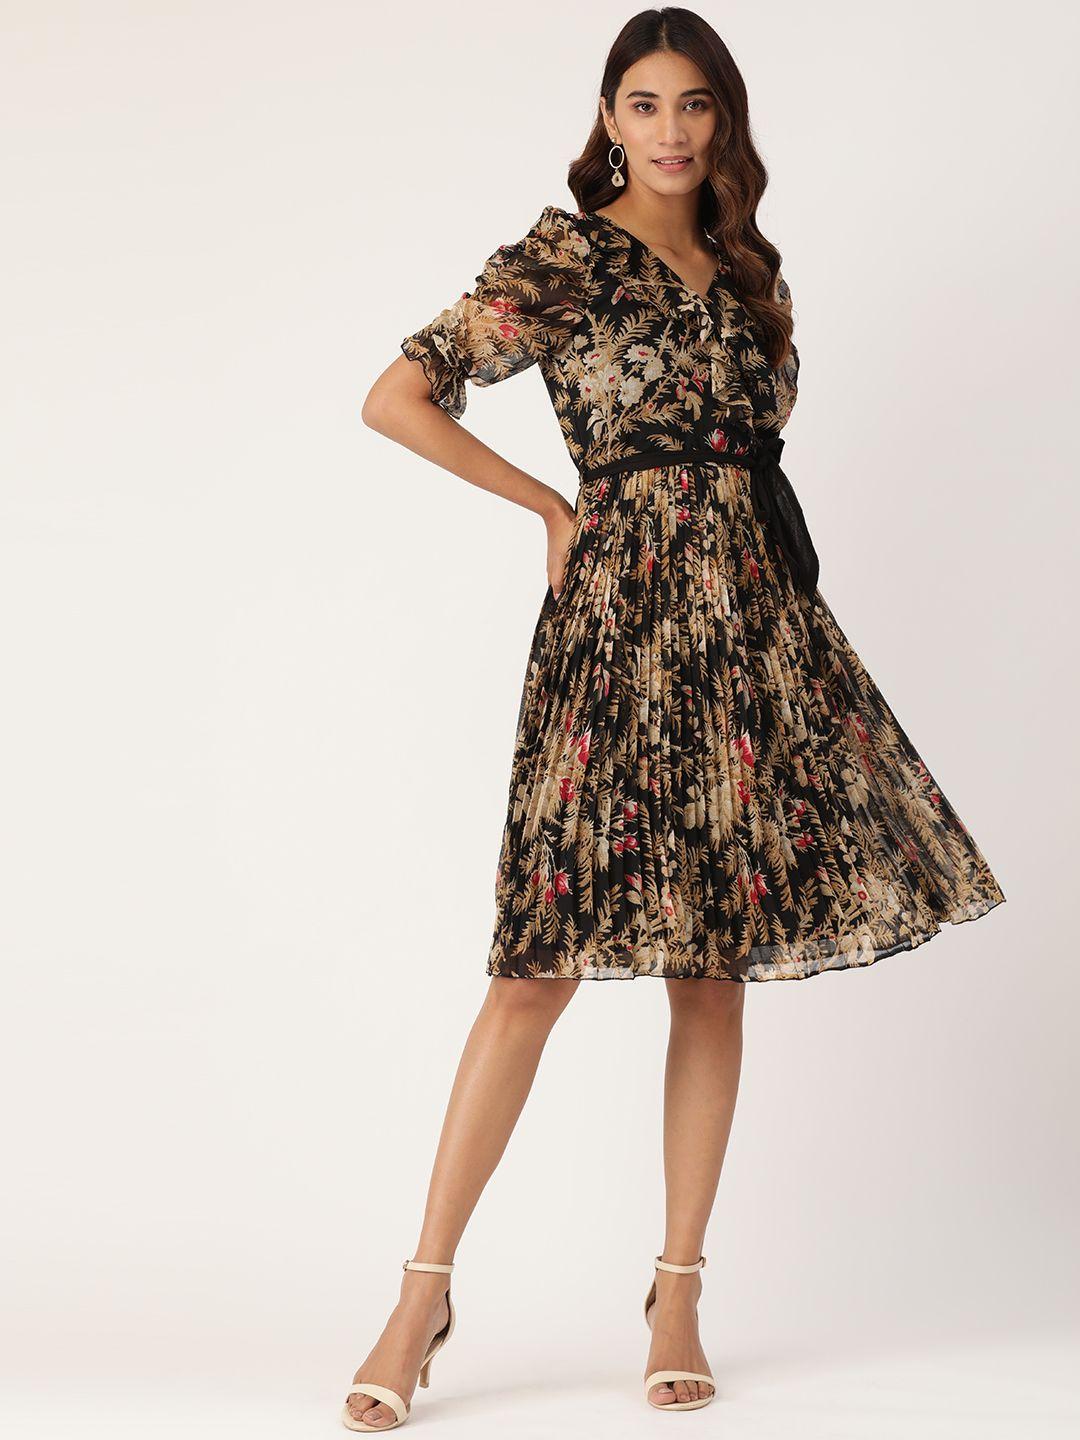 antheaa-black-&-beige-floral-printed-accordion-pleated-wrap-dress-with-belt